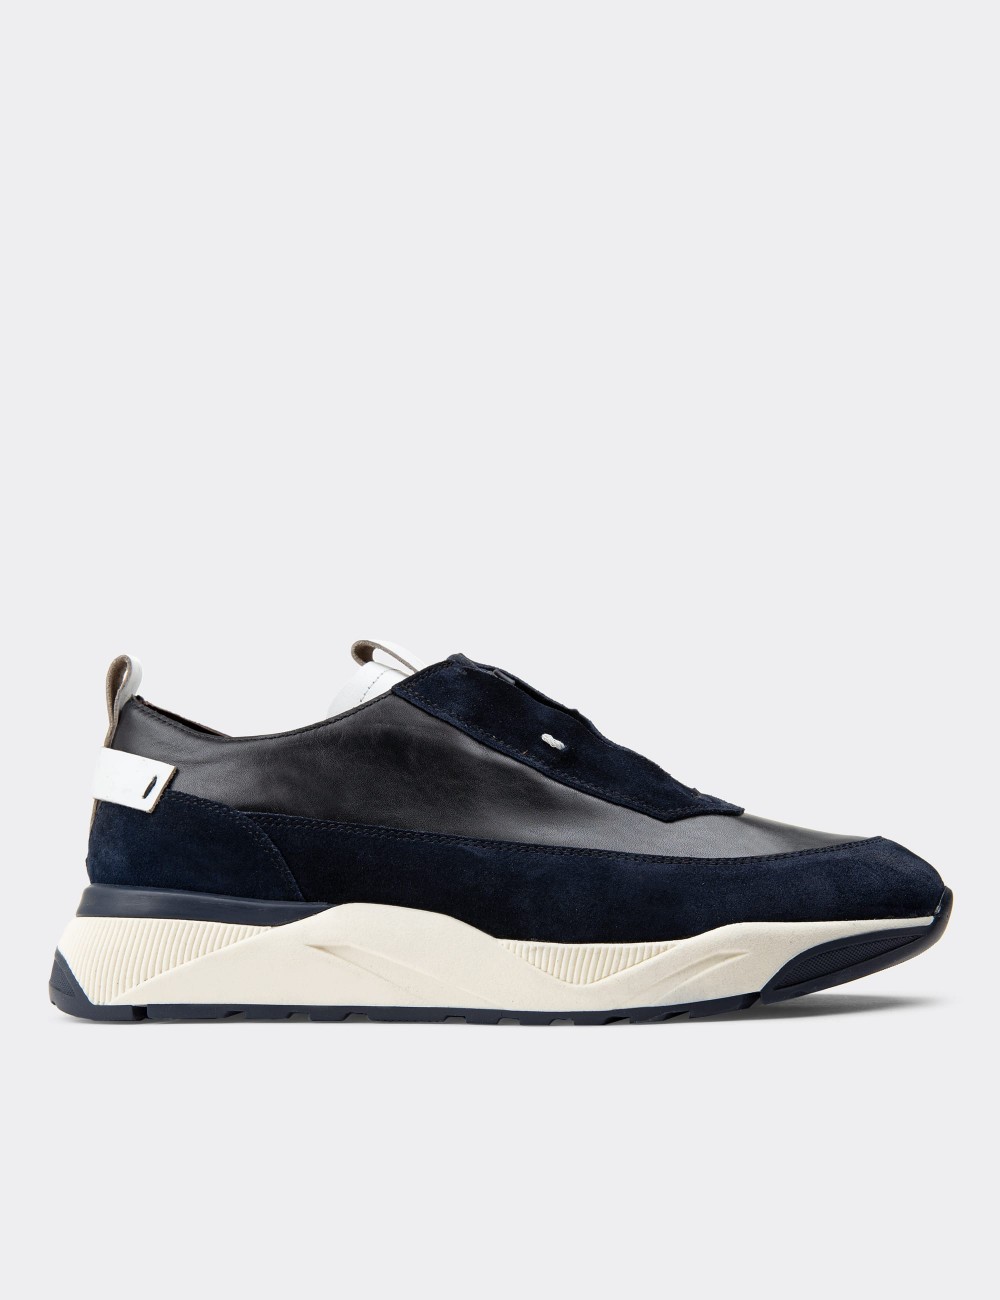 Navy Suede Leather Sneakers - 01917MLCVE01